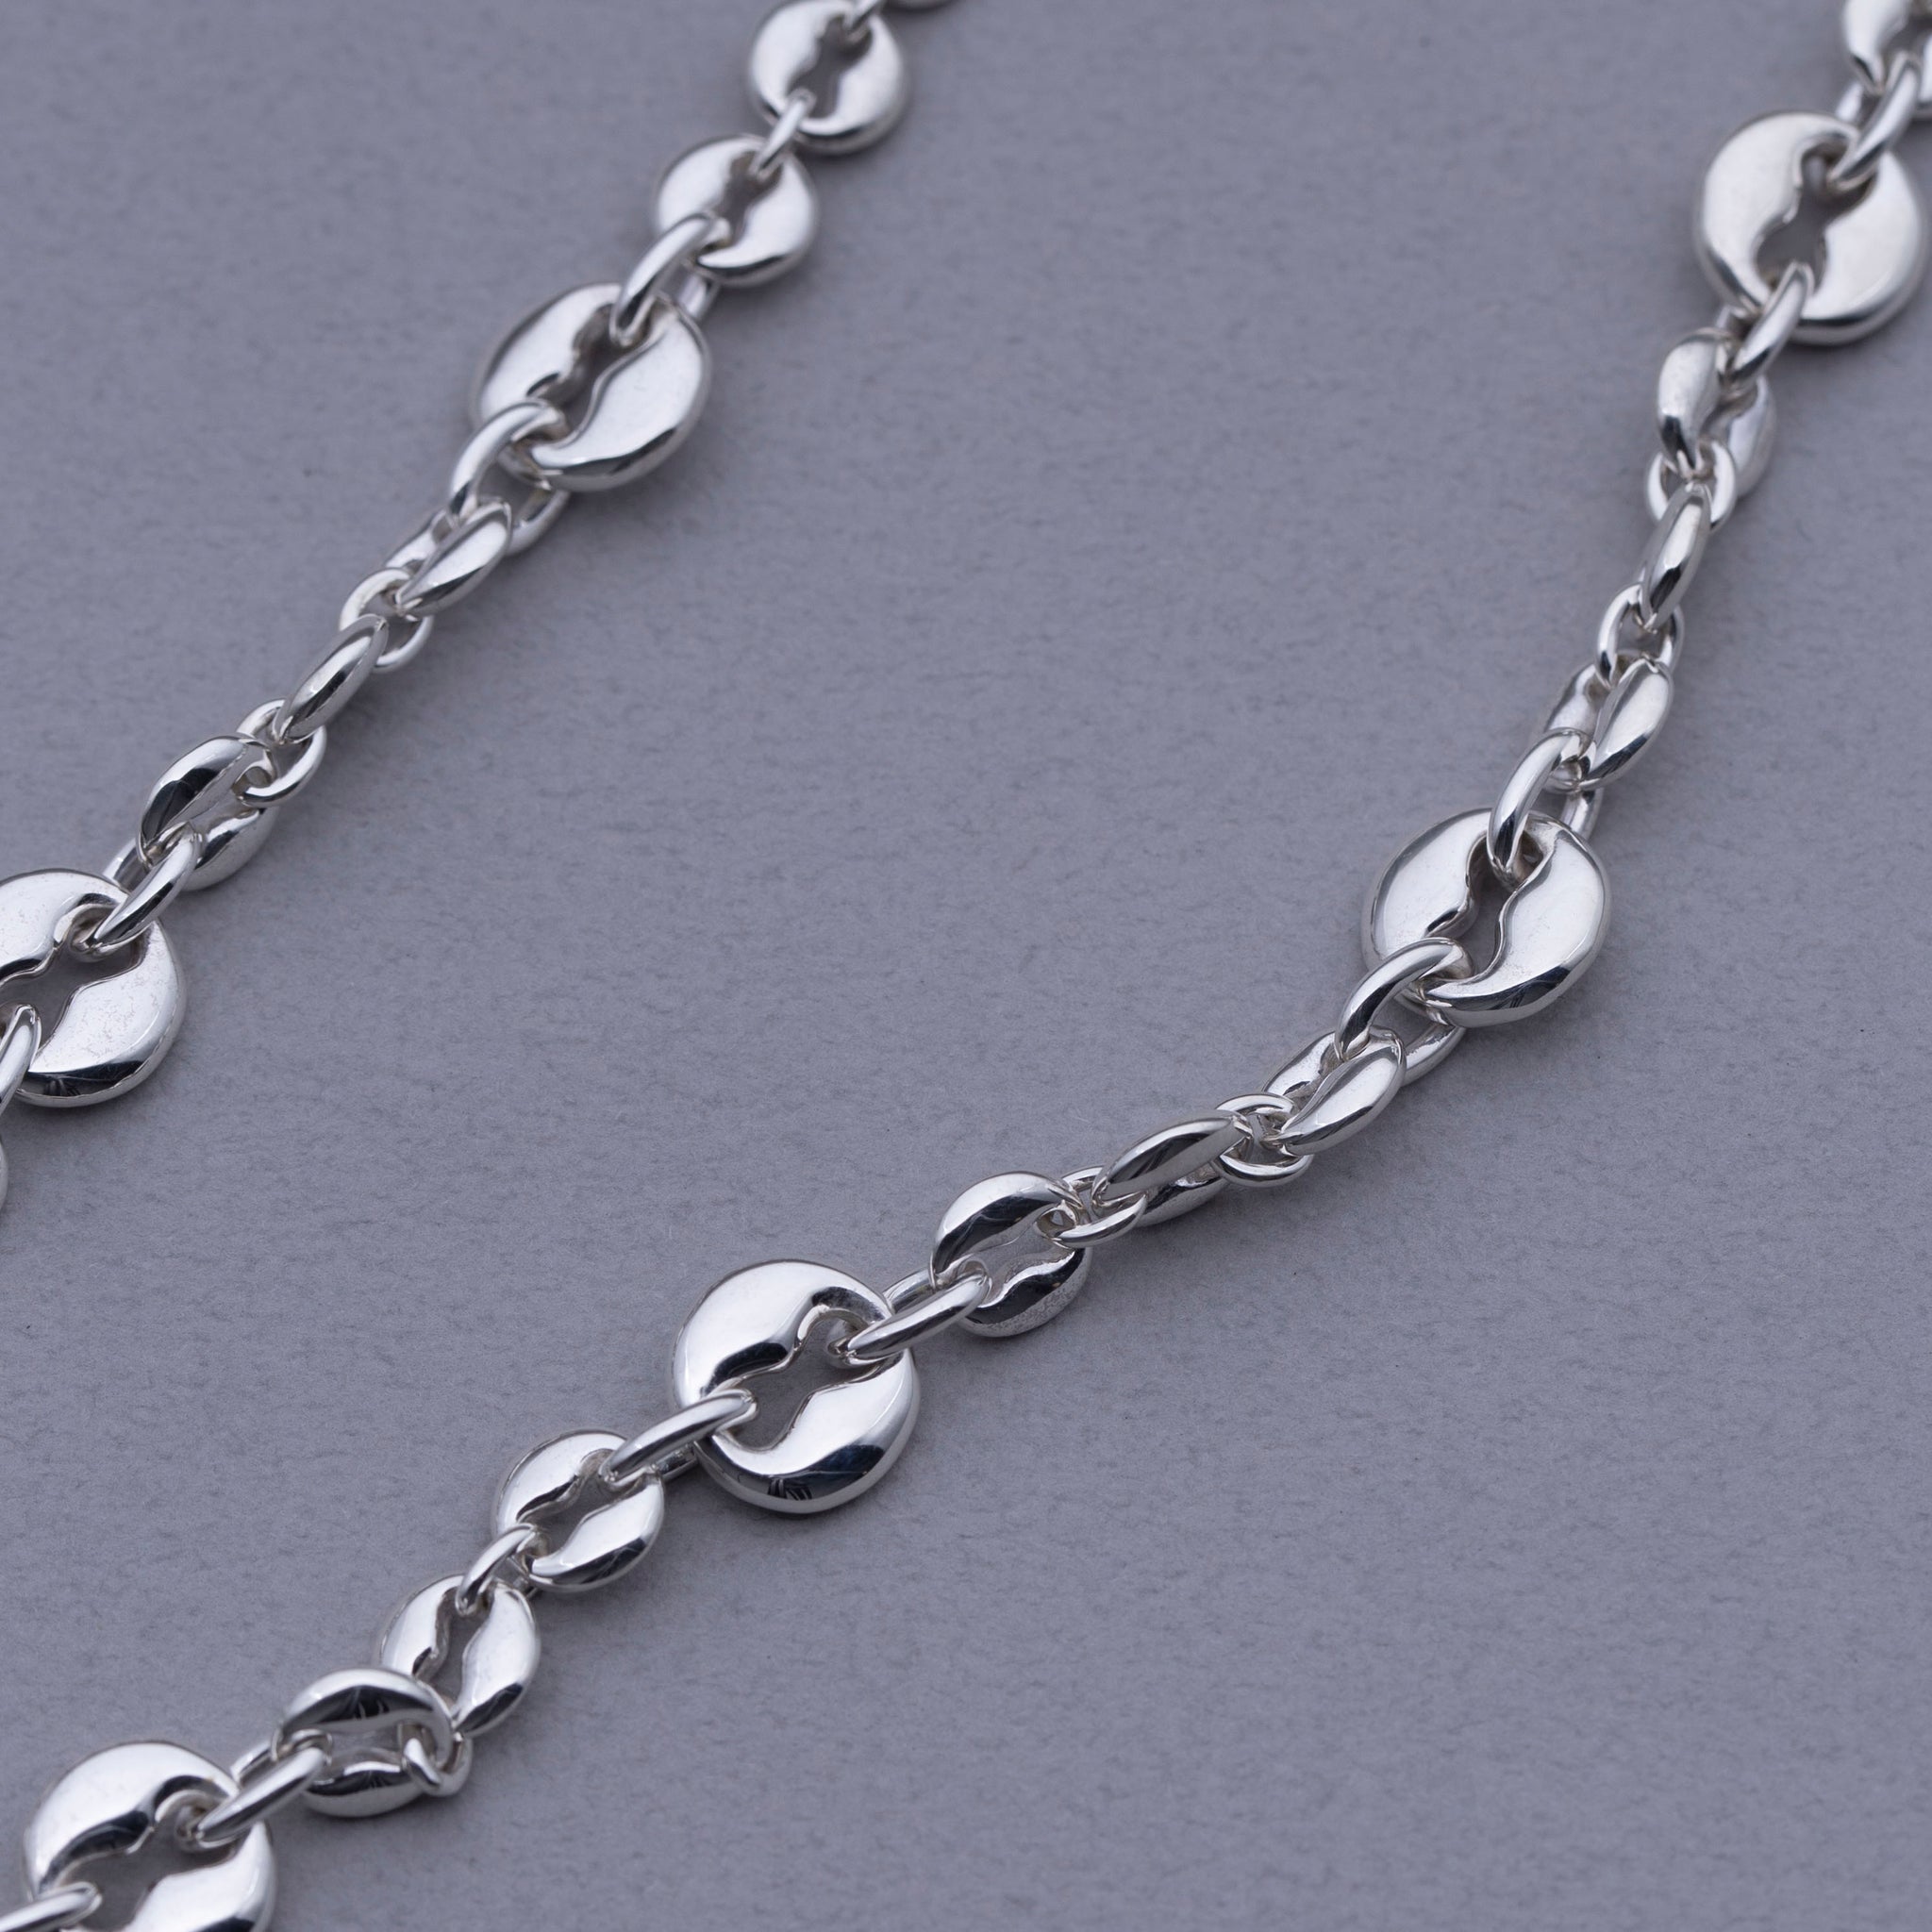 8hole necklace Silver